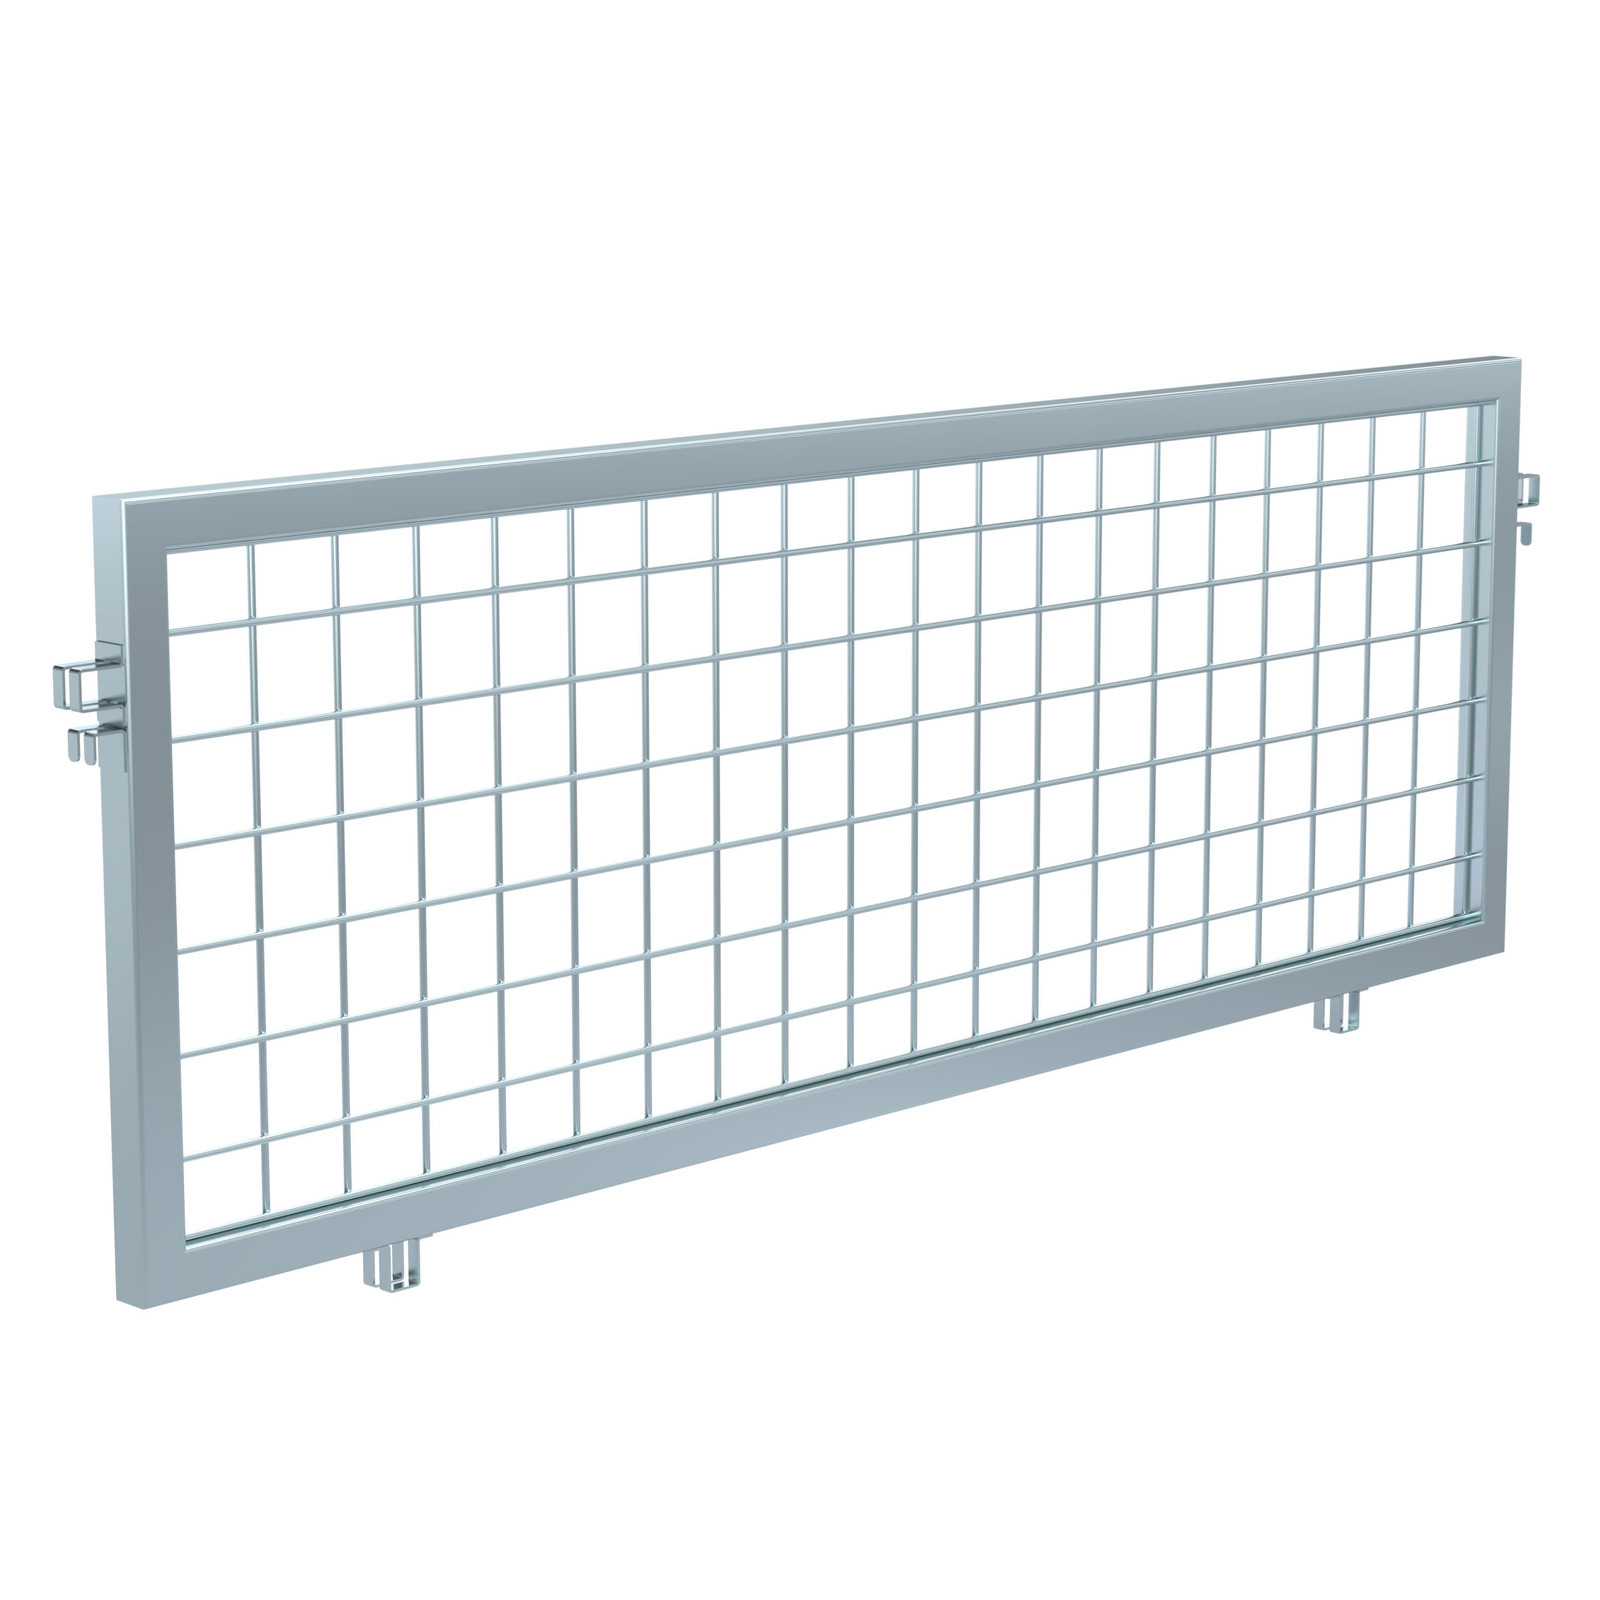 Half Height Divider to suit Storage Cage